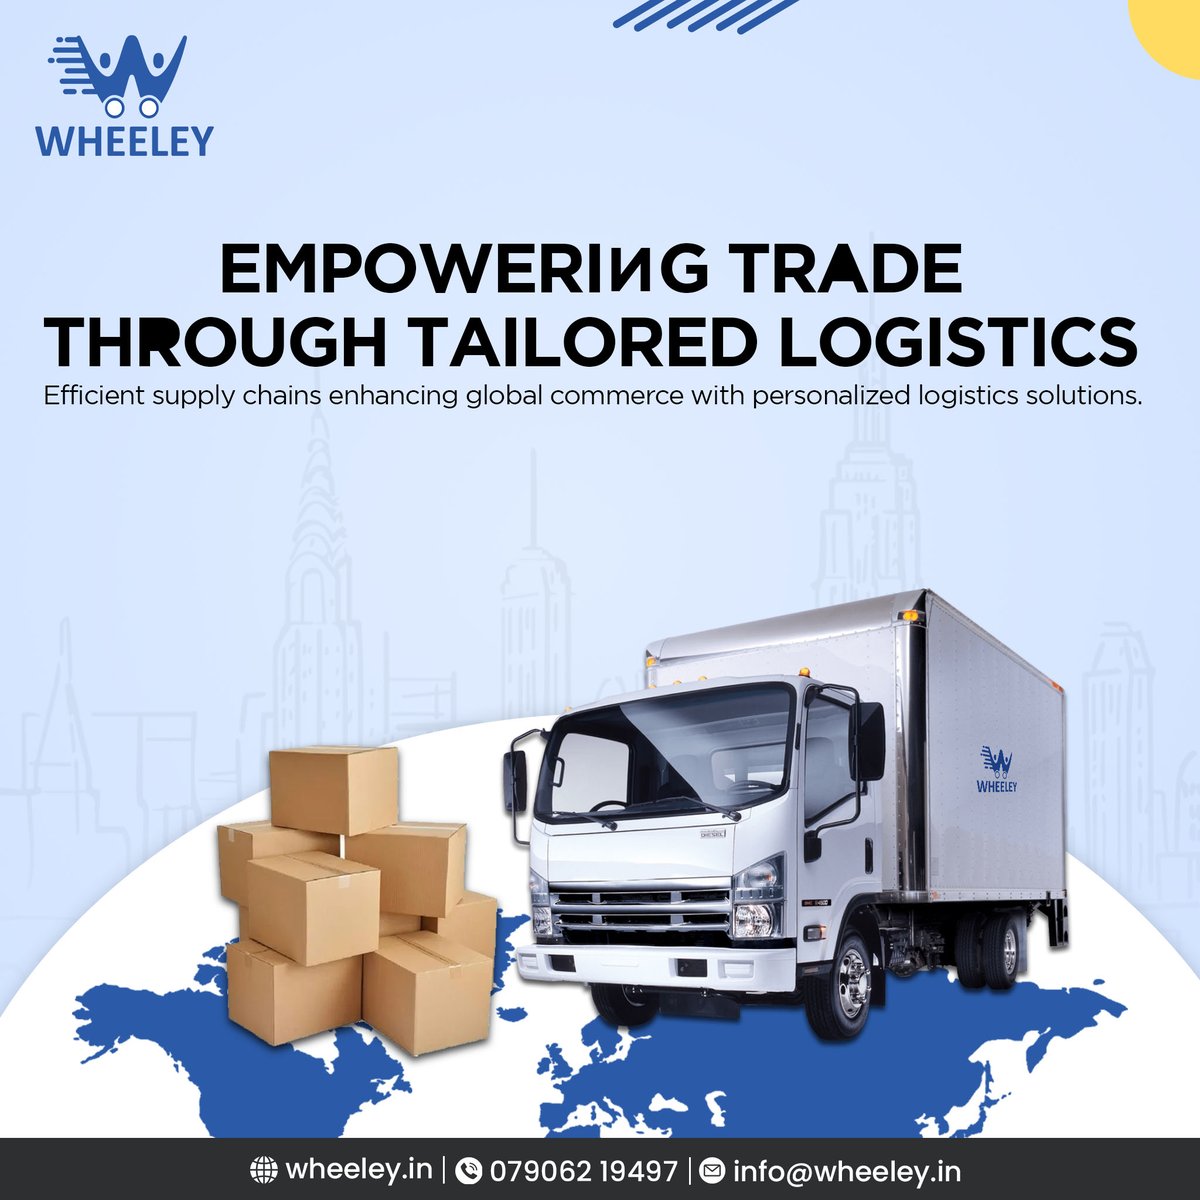 🚚Unleash Trade Potential! 🌏Elevate commerce with personalized logistics solutions.✨🚀

Visit us: wheeley.in
Contact us: 07906219497

#EmpowerTrade #TailoredLogistics #LogisticsBoostingTrade #LogisticsEmpowerTrade